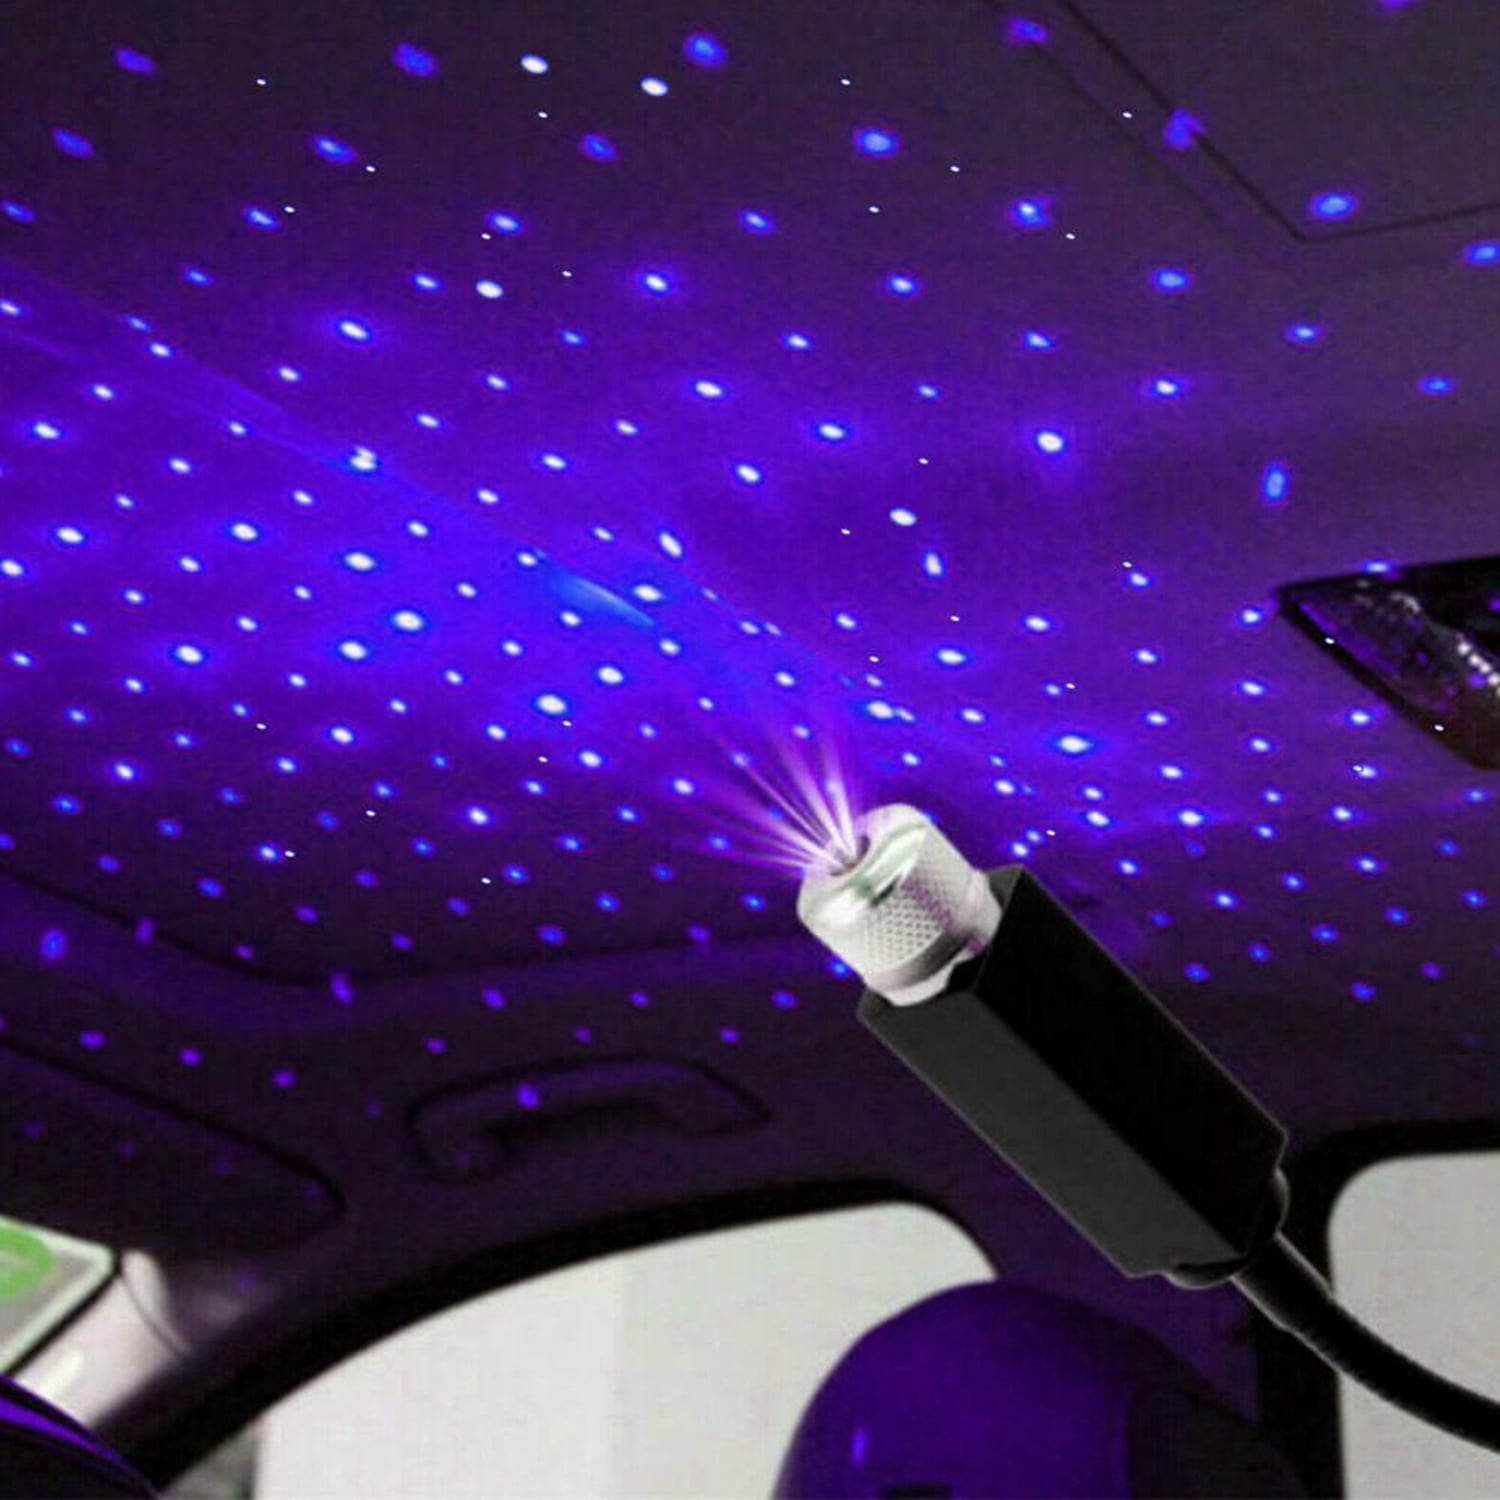 USB Star Sky Night Light Ceiling Romantic Car Roof Home Party Decoration Lamp US